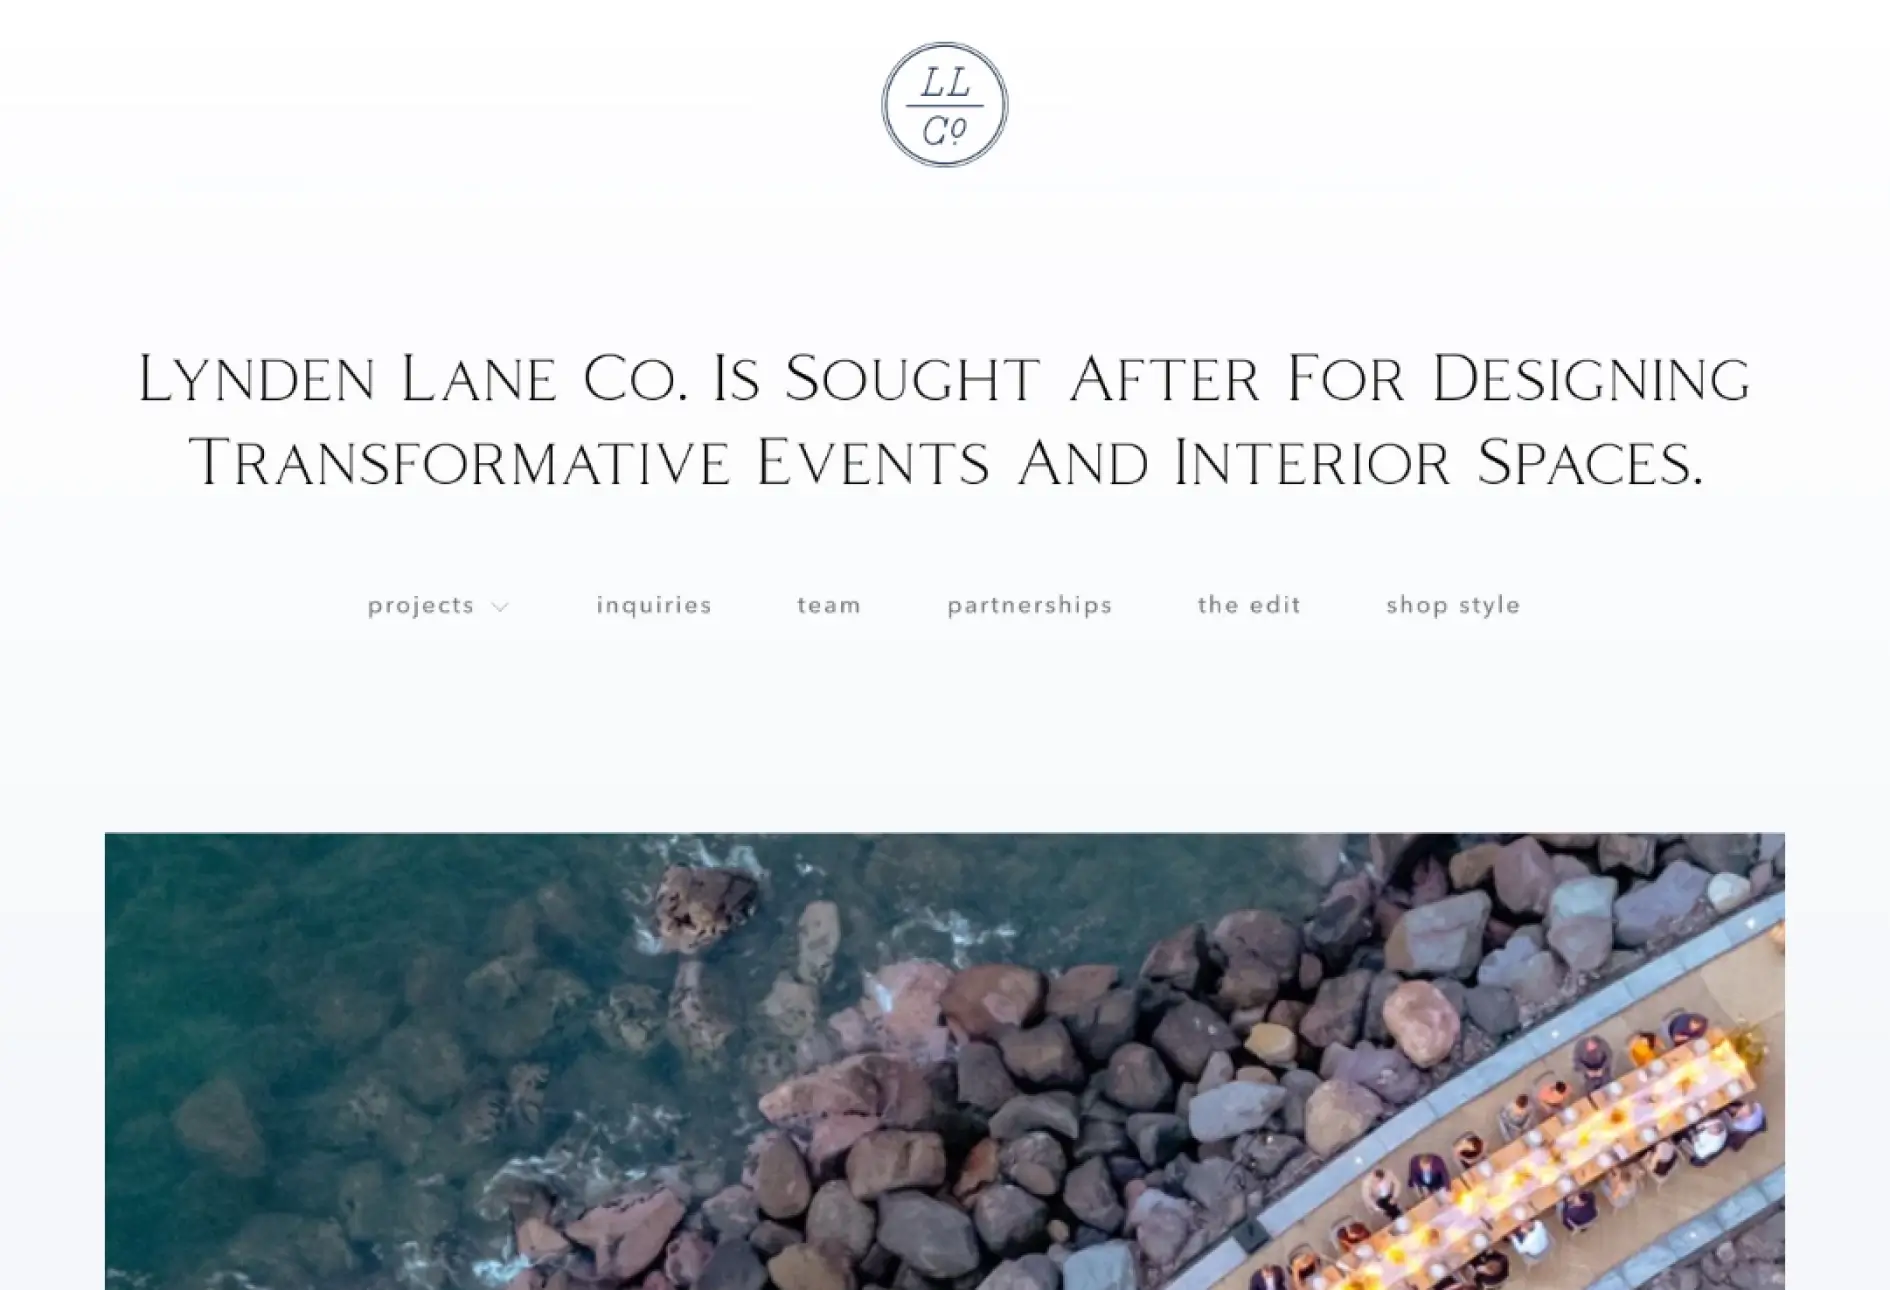 The Lynden Lane Co website designed and built by Markham Square.